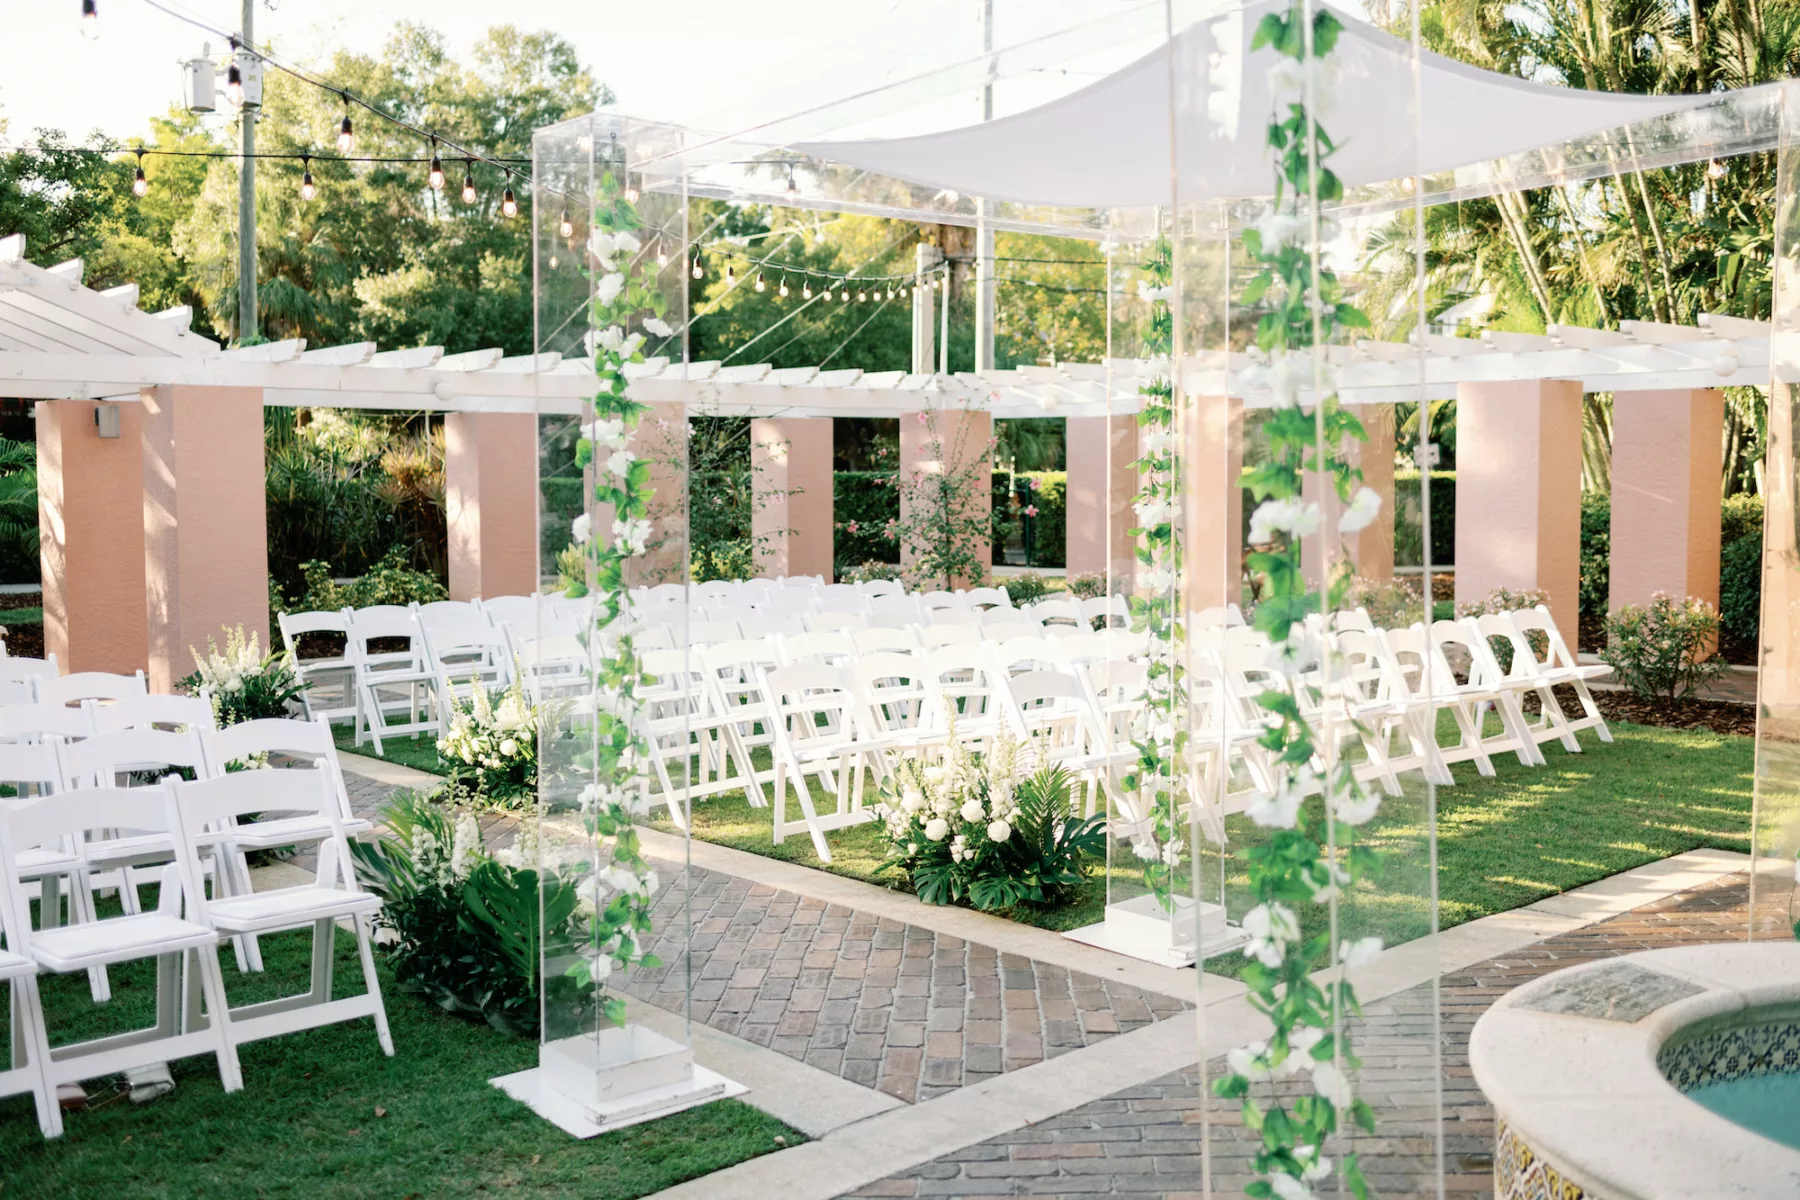 Timeless Outdoor Jewish Tea Garden Wedding Ceremony Decor Inspiration | White Folding Garden Chairs | Acrylic Chuppah with White Roses and Greenery Garland | St Pete Photographer Dewitt For Love | Event Planner Coastal Coordinating | Florist Botanica Design Studio | St. Pete Venue The Vinoy